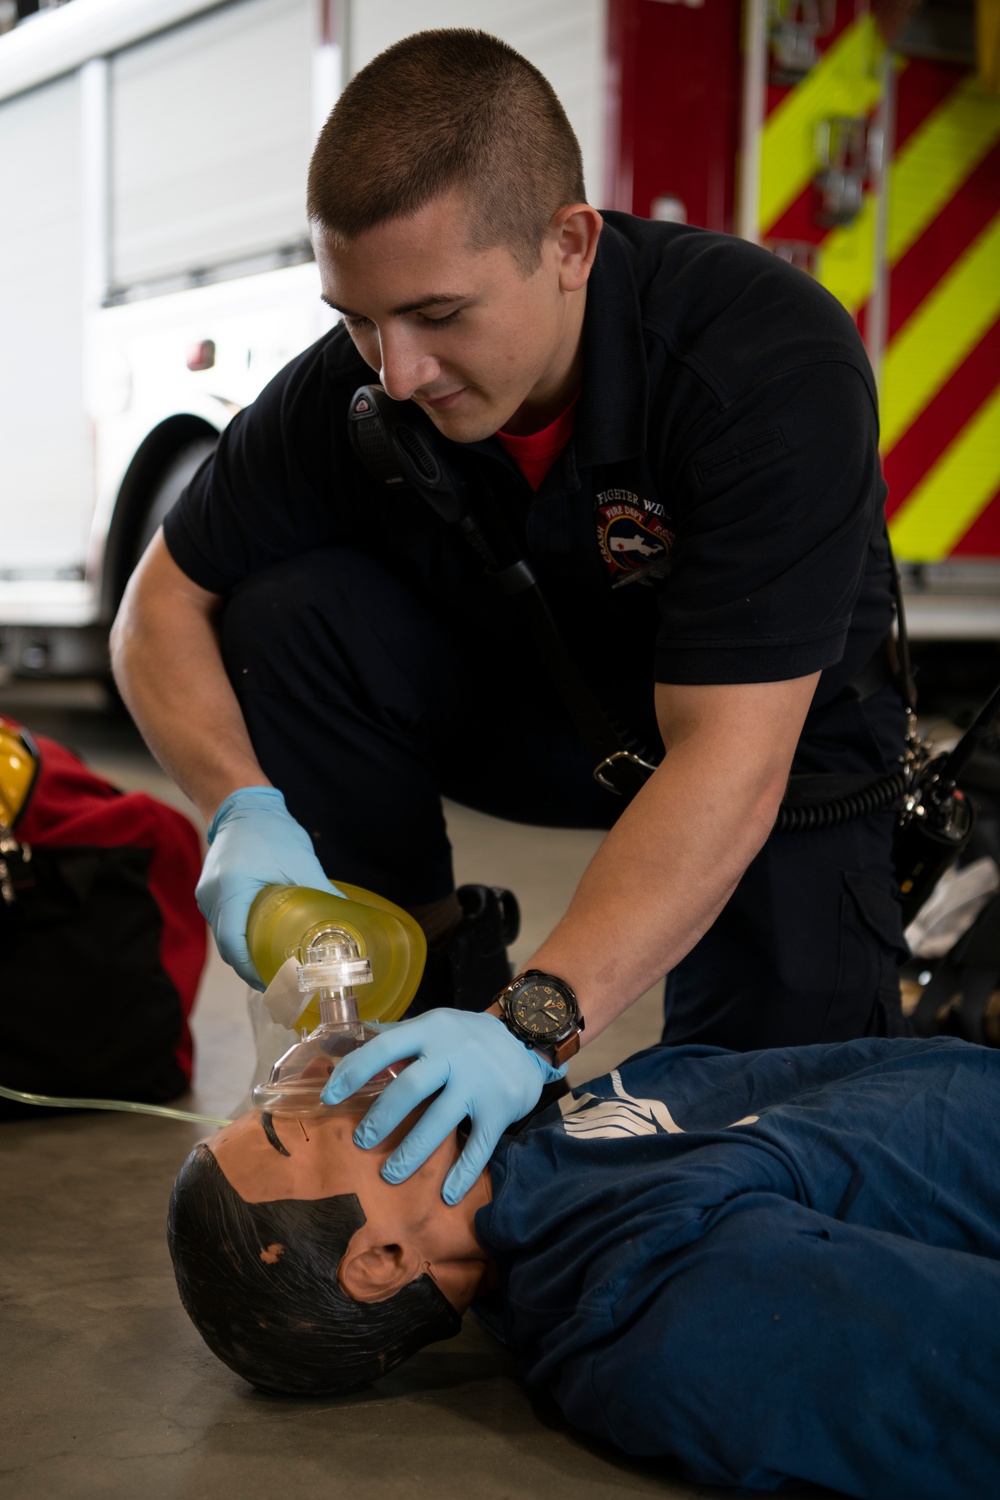 104FW firefighters highlight capabilities during national EMS week